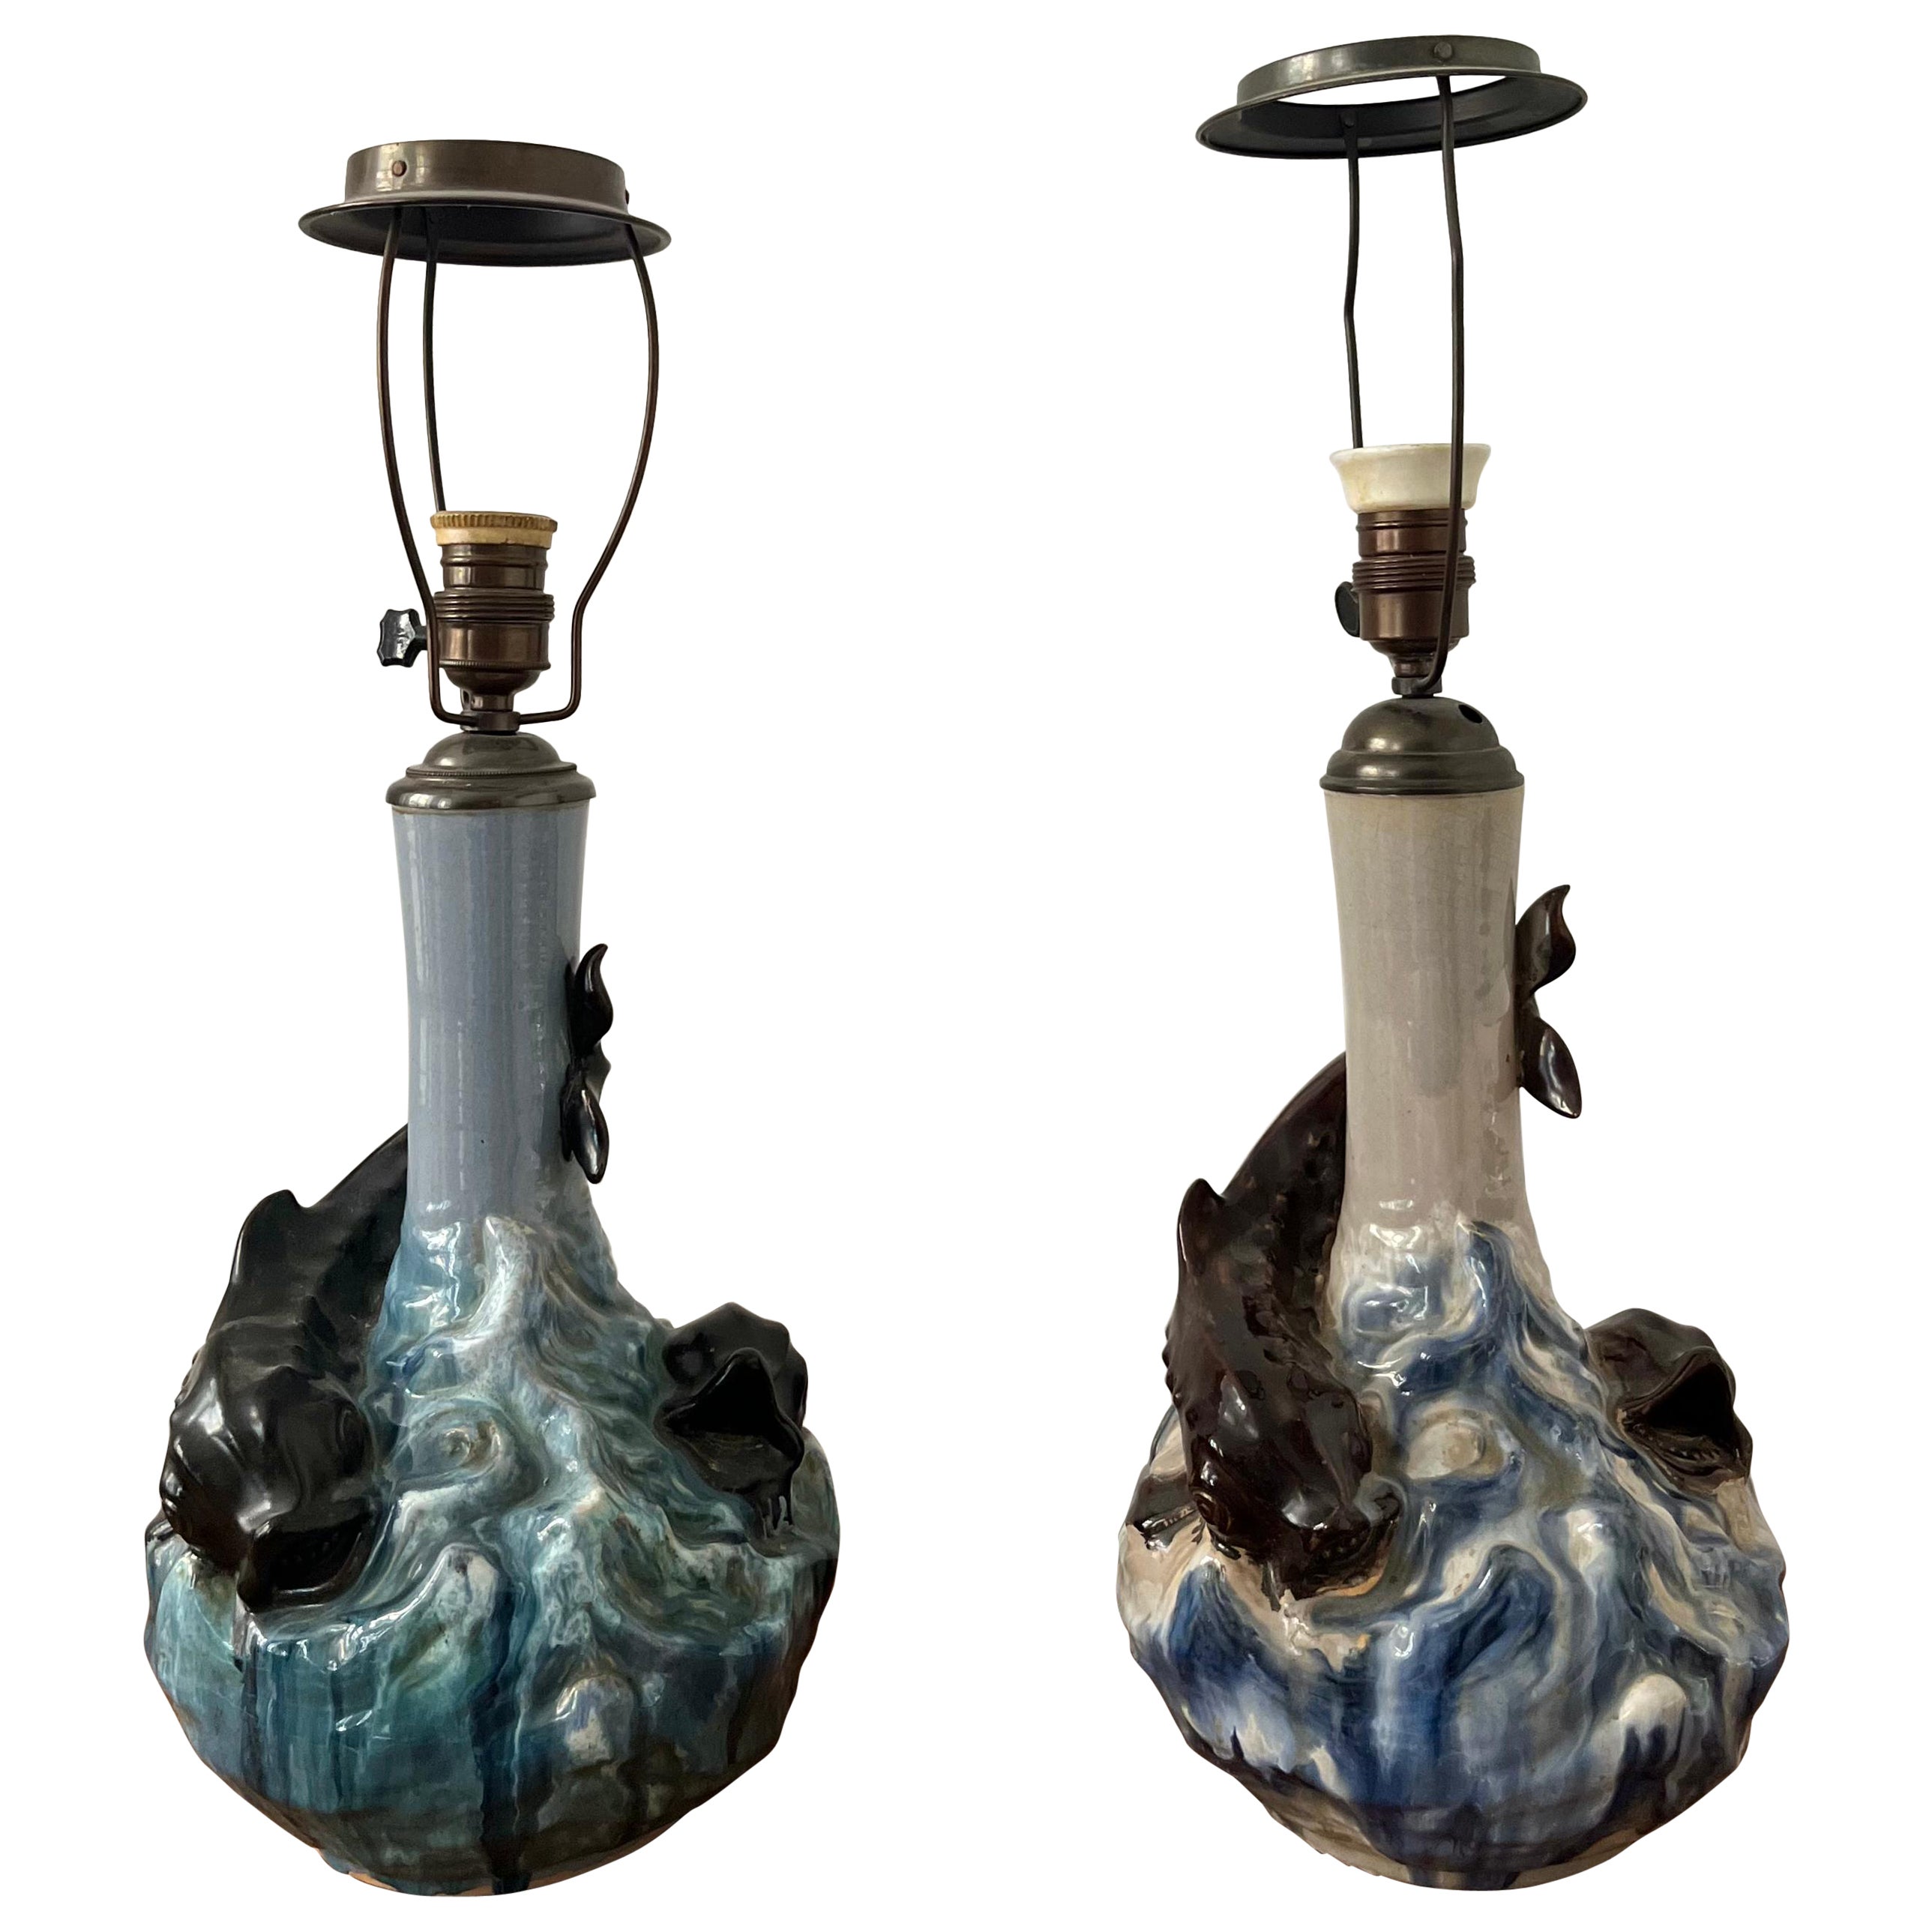 This rare pair of Danish ceramic table lamps are designed by Hans Ancher Wolffsen (1870-1929) / Søholm and is exhibited at Bornholms Museum. Highly decorated and with a glossy glaze and sculpted fish in a roaring sea, this design was made around